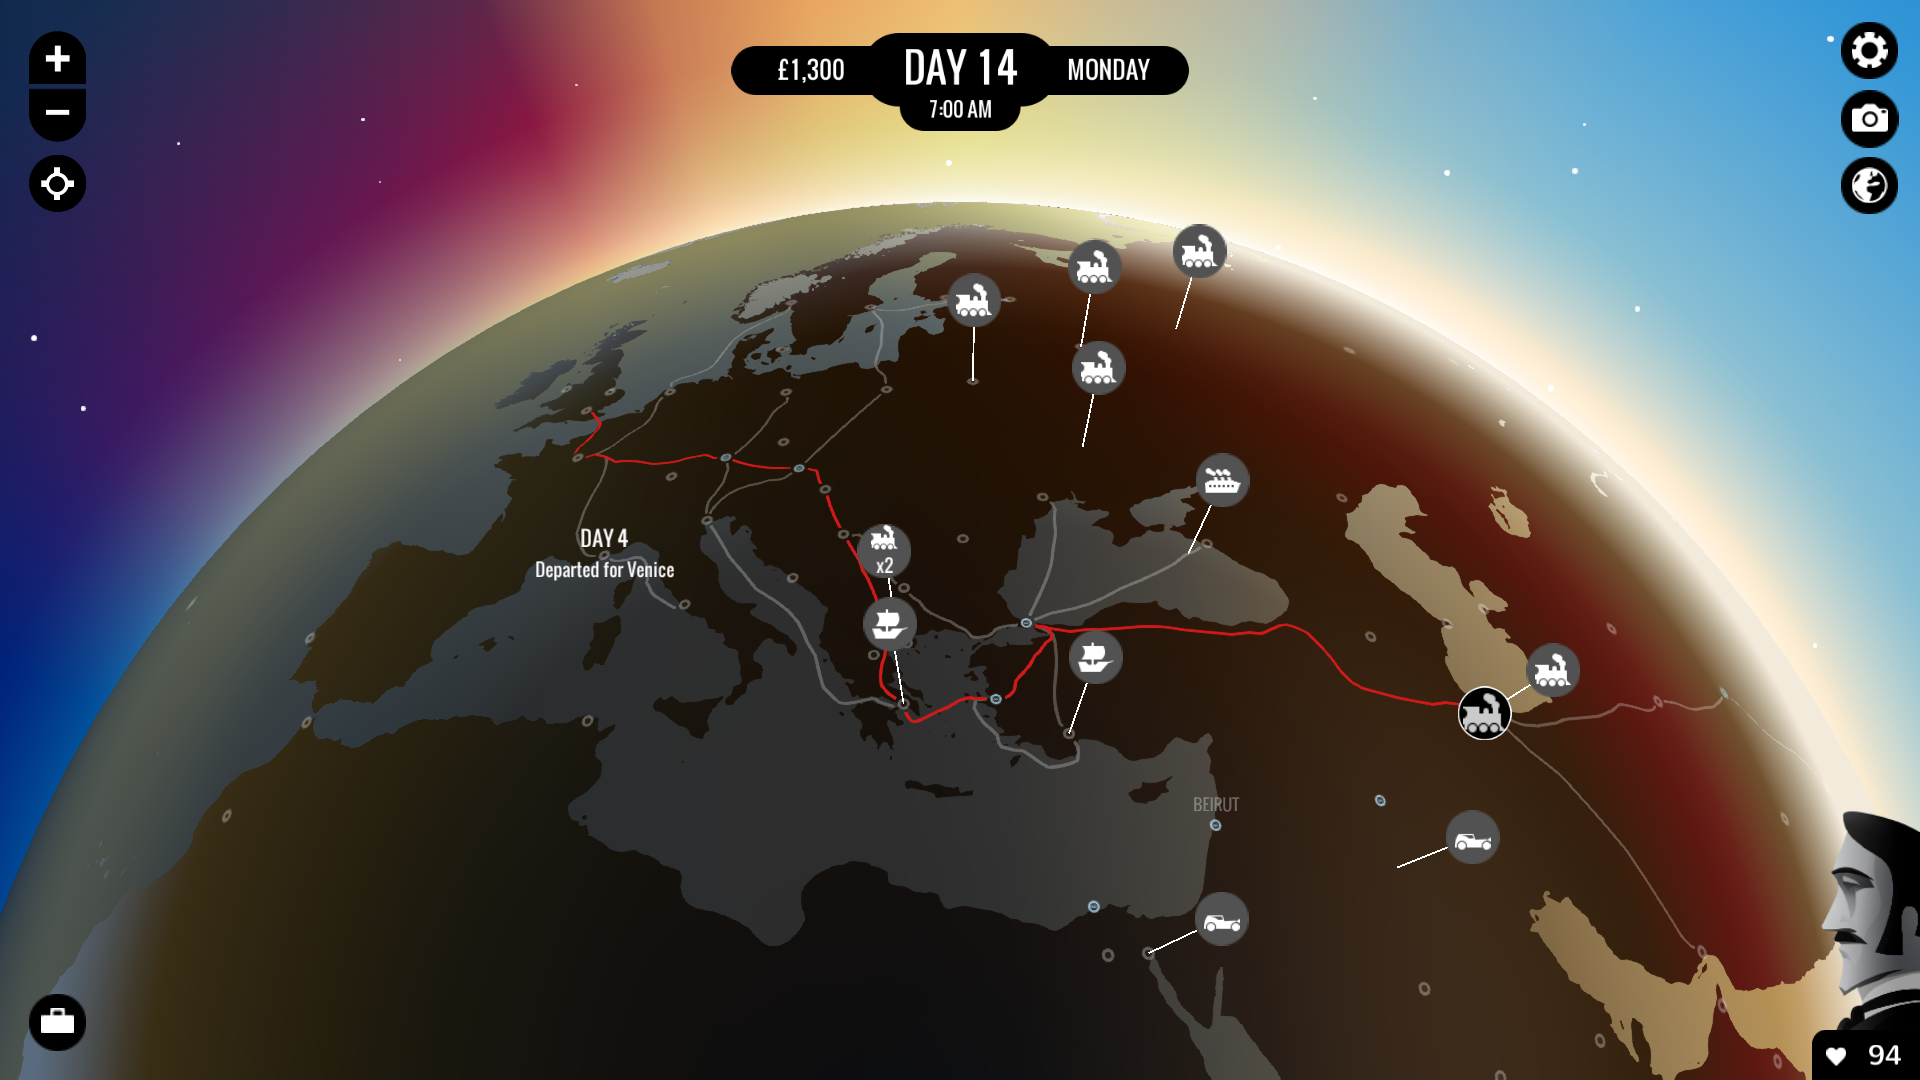 Gameplay showing the travel route across the globe